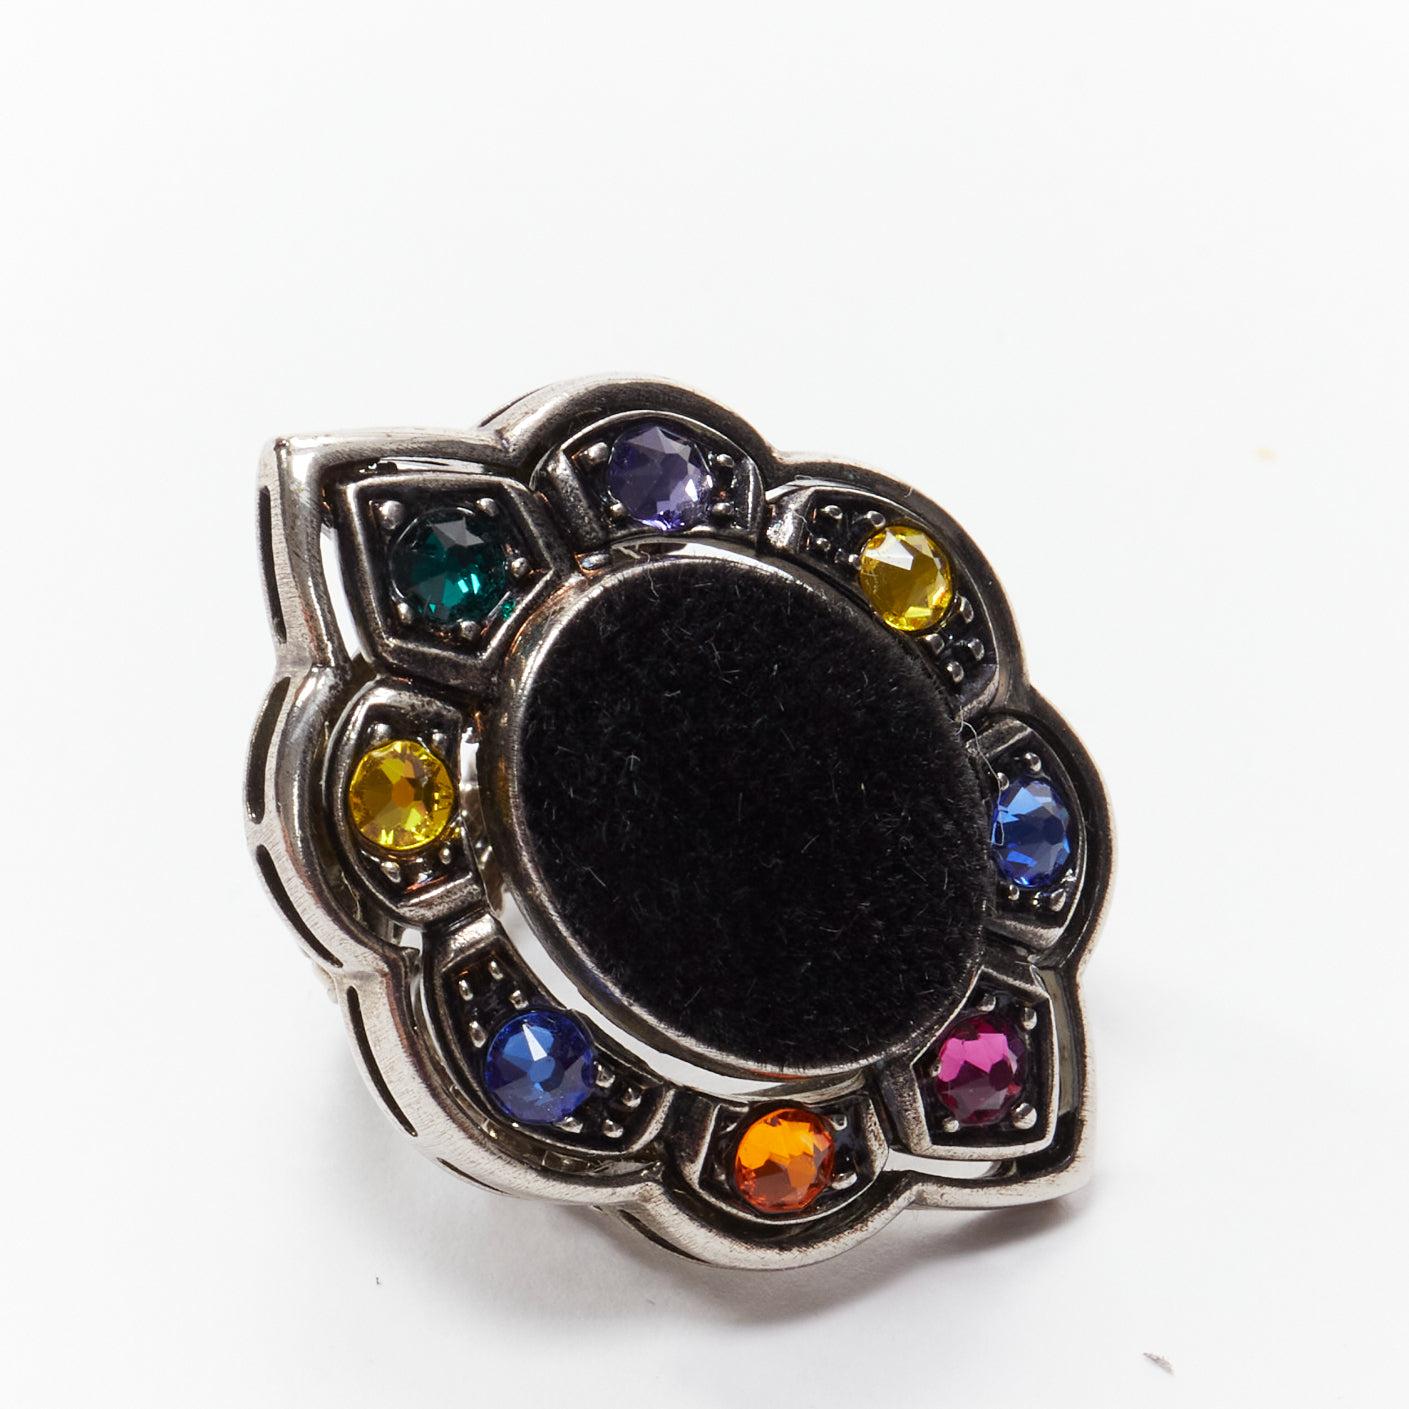 Women's GUCCI Alessandro Michele black velvet colorful crystals oversized cocktail ring For Sale